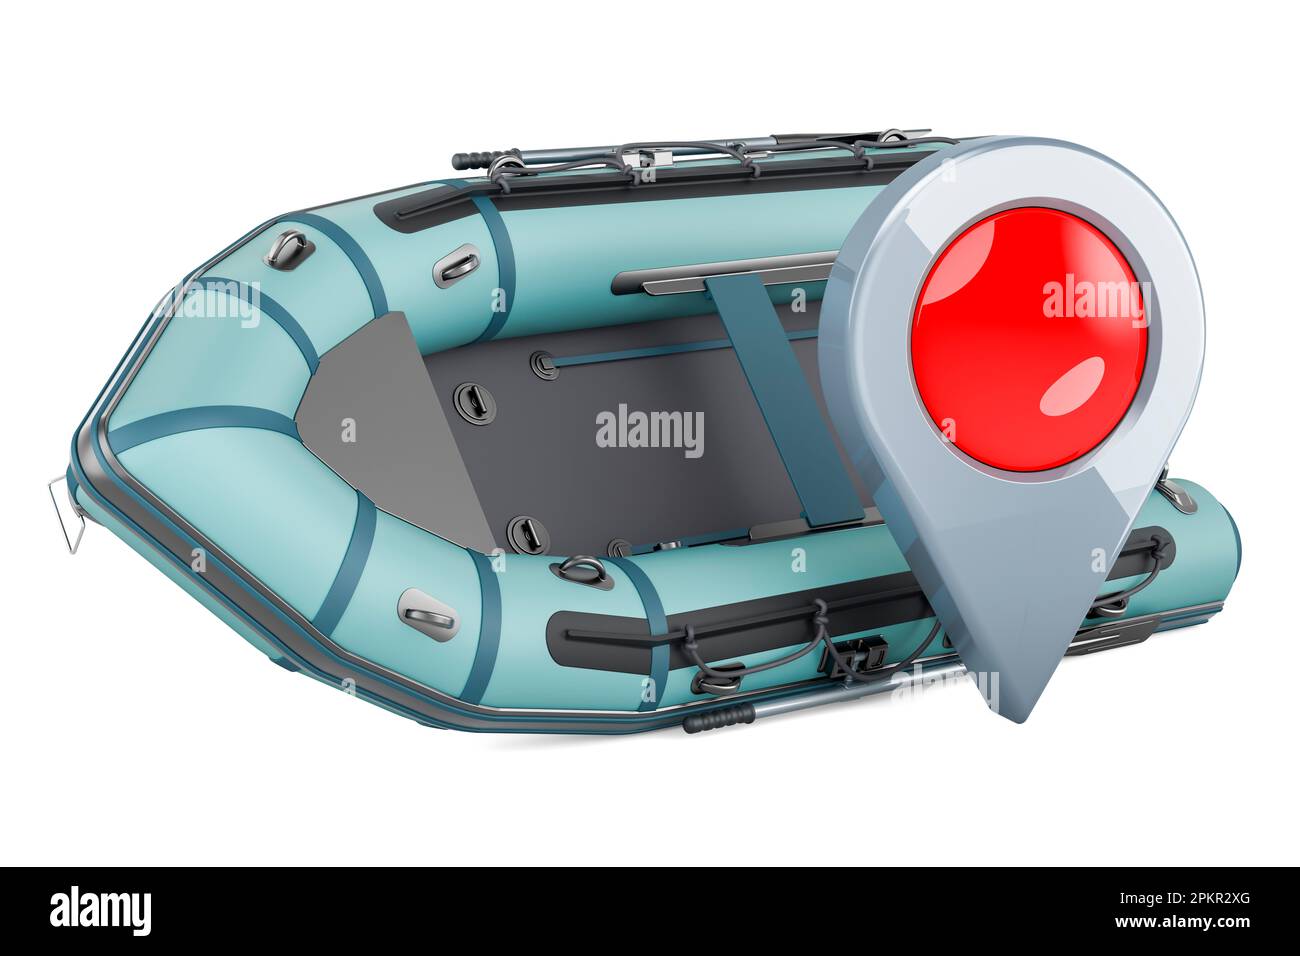 Inflatable boat with map pointer, 3D rendering isolated on white background Stock Photo